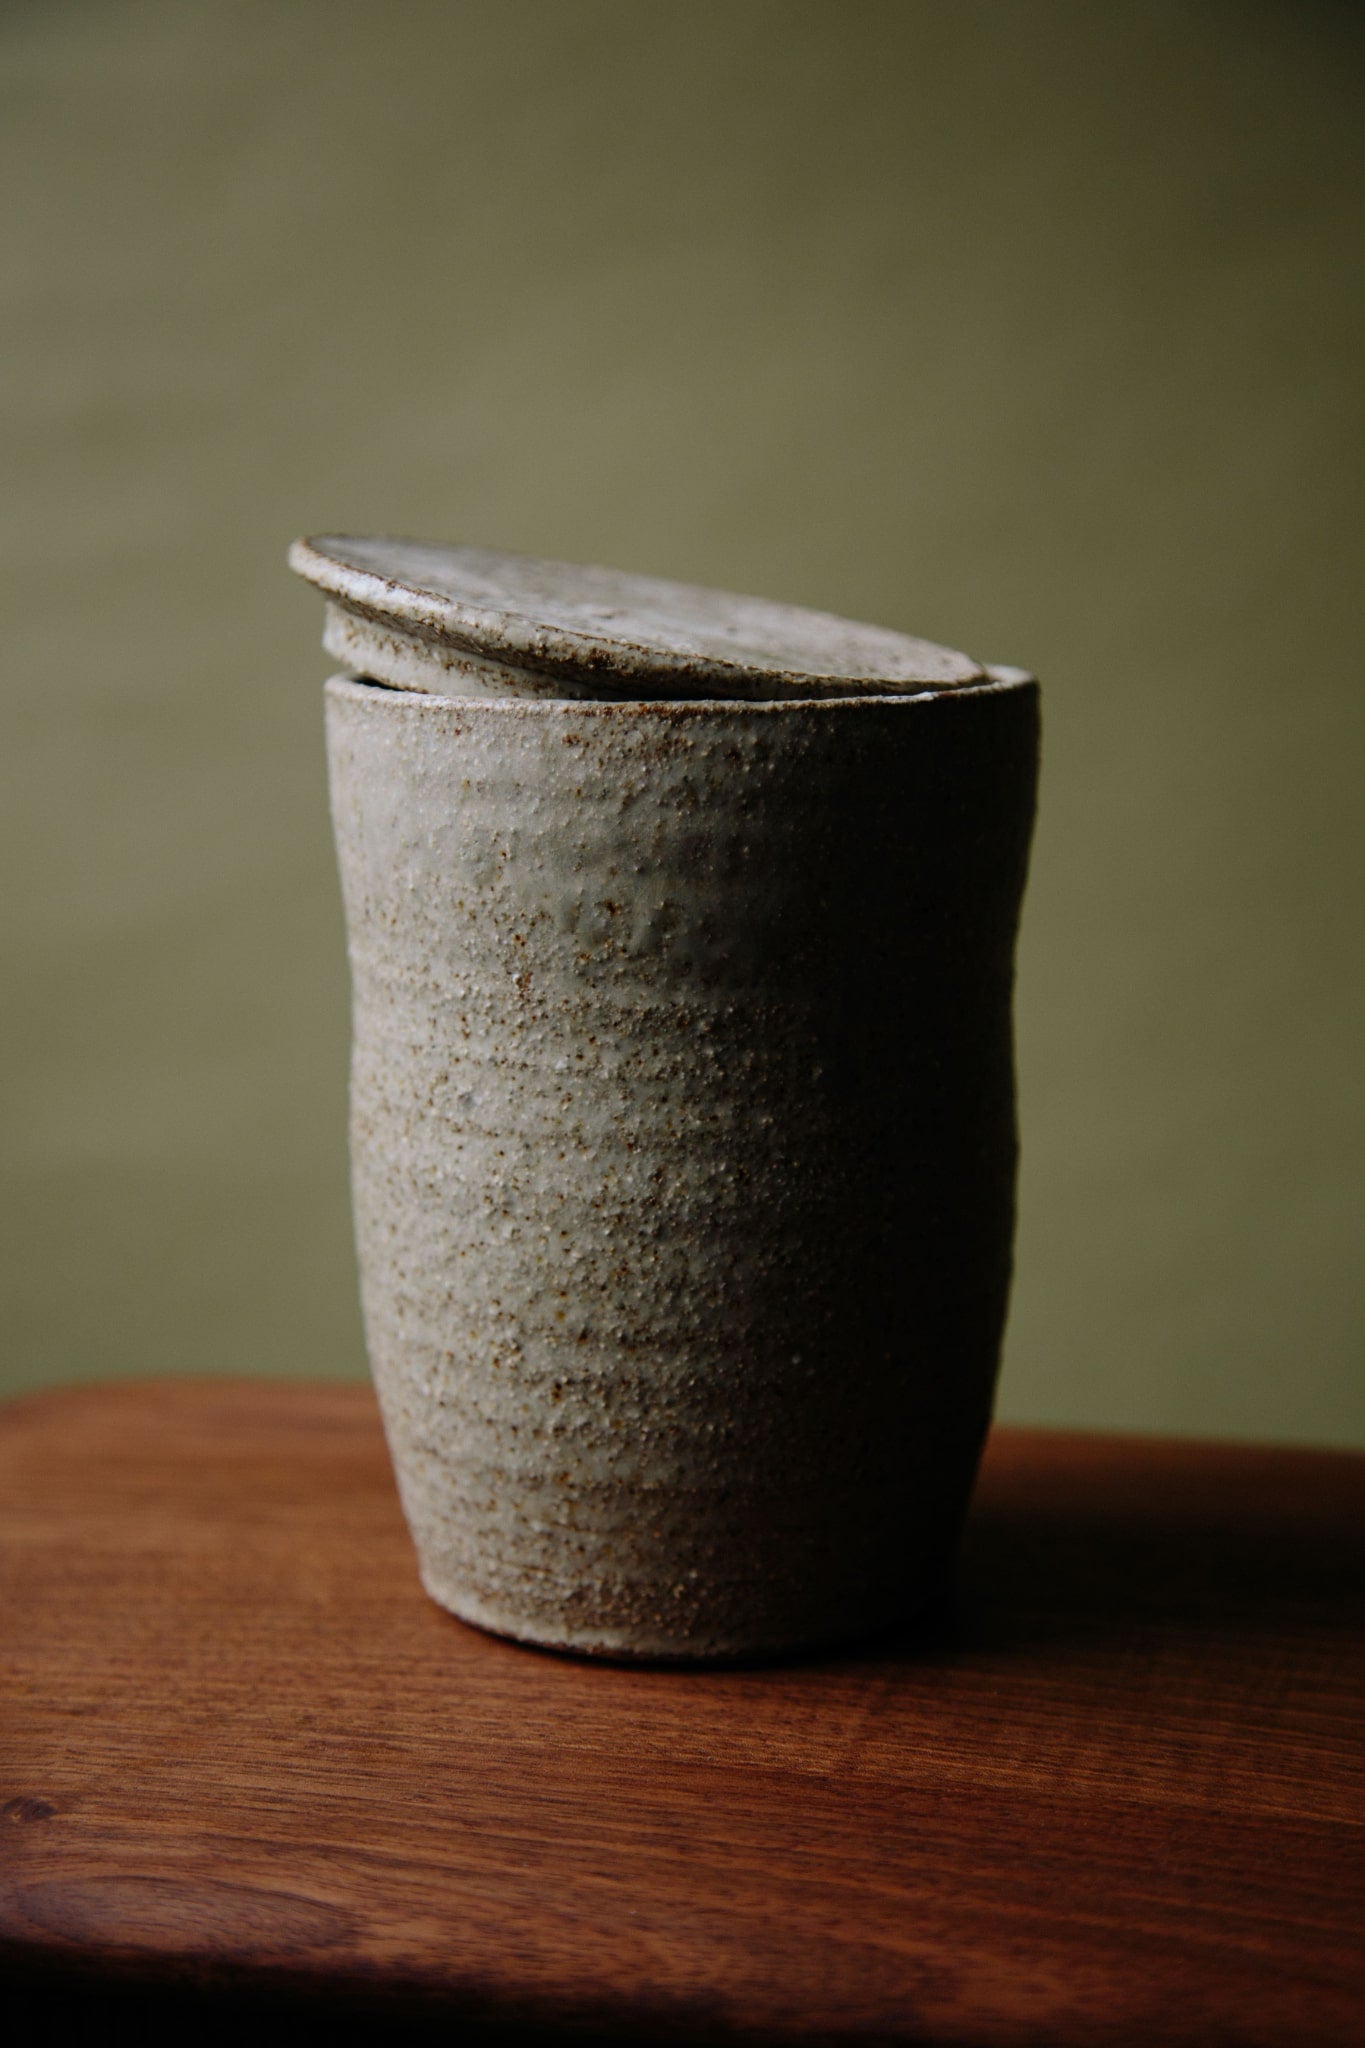 ALT=A textured, hand-thrown ceramic jar with a lid photographed on a wooden stool against an olive green background. The lid is at an angle so the shape can be seen.